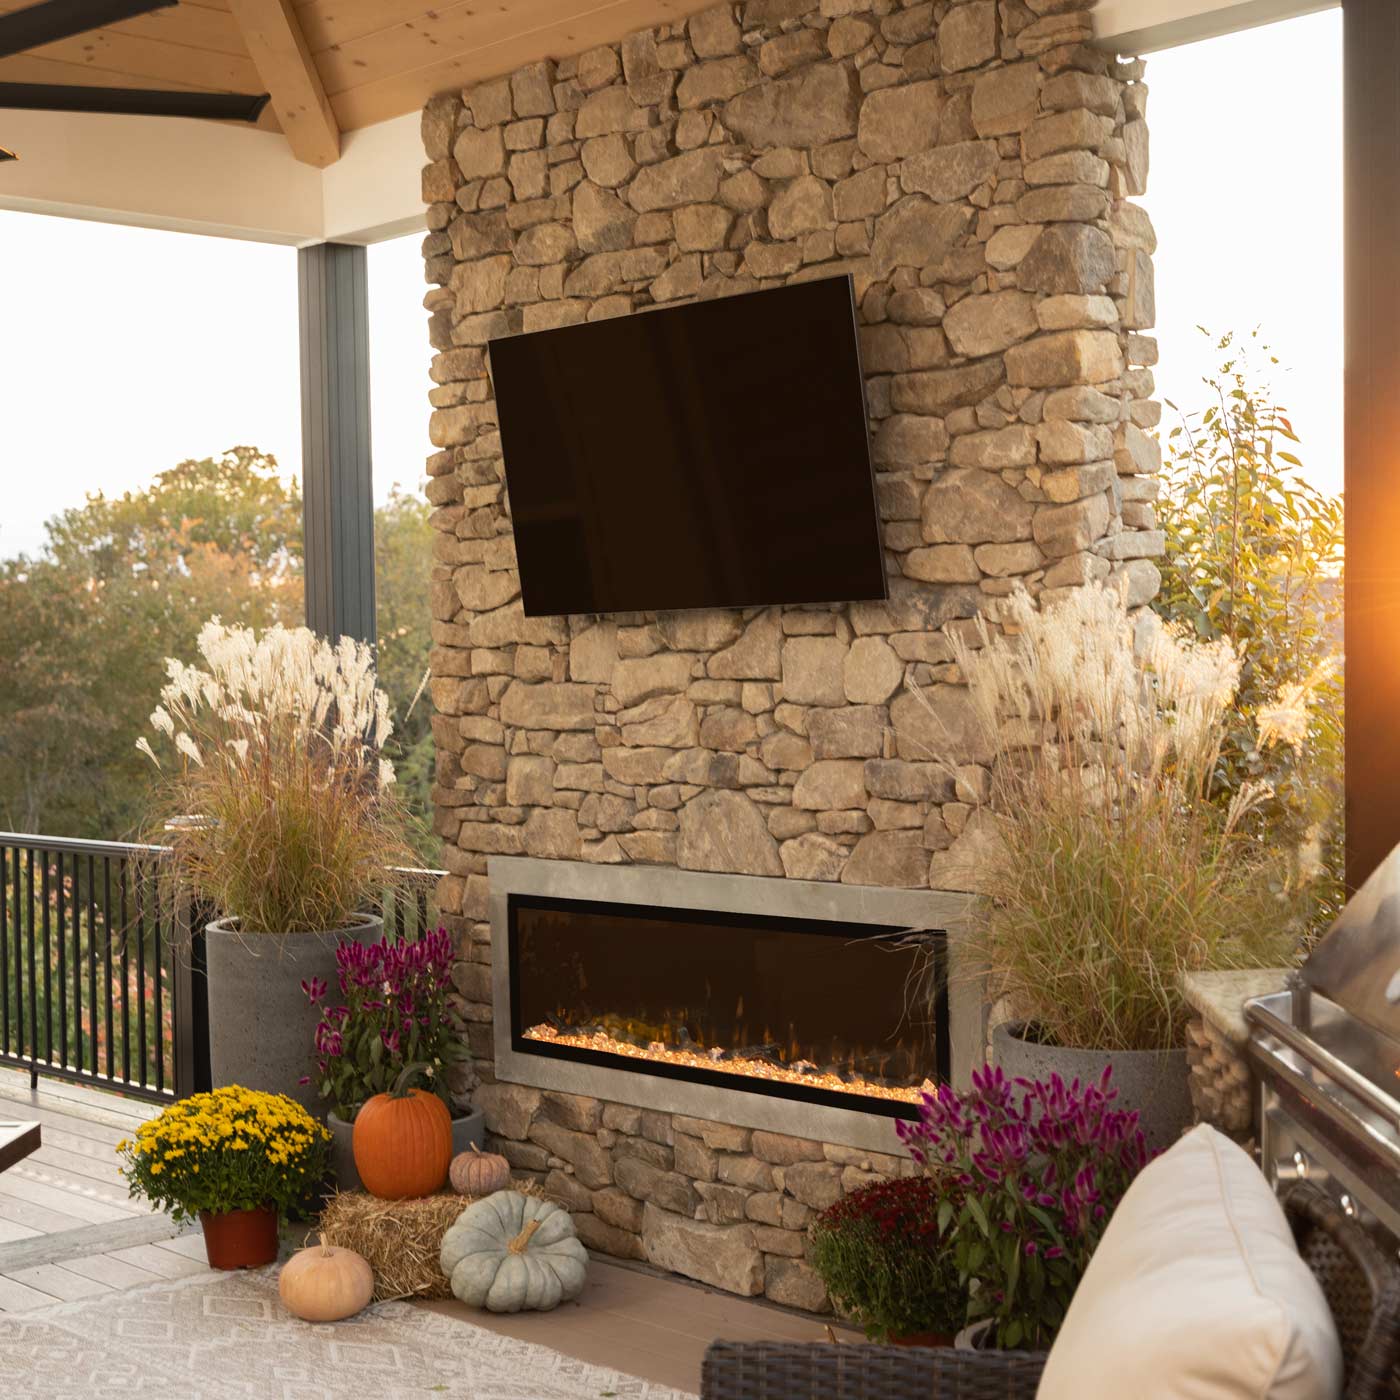 Fall decor outdoor entertaining with Touchstone Sideline Elite 80049 Outdoor Electric Fireplace